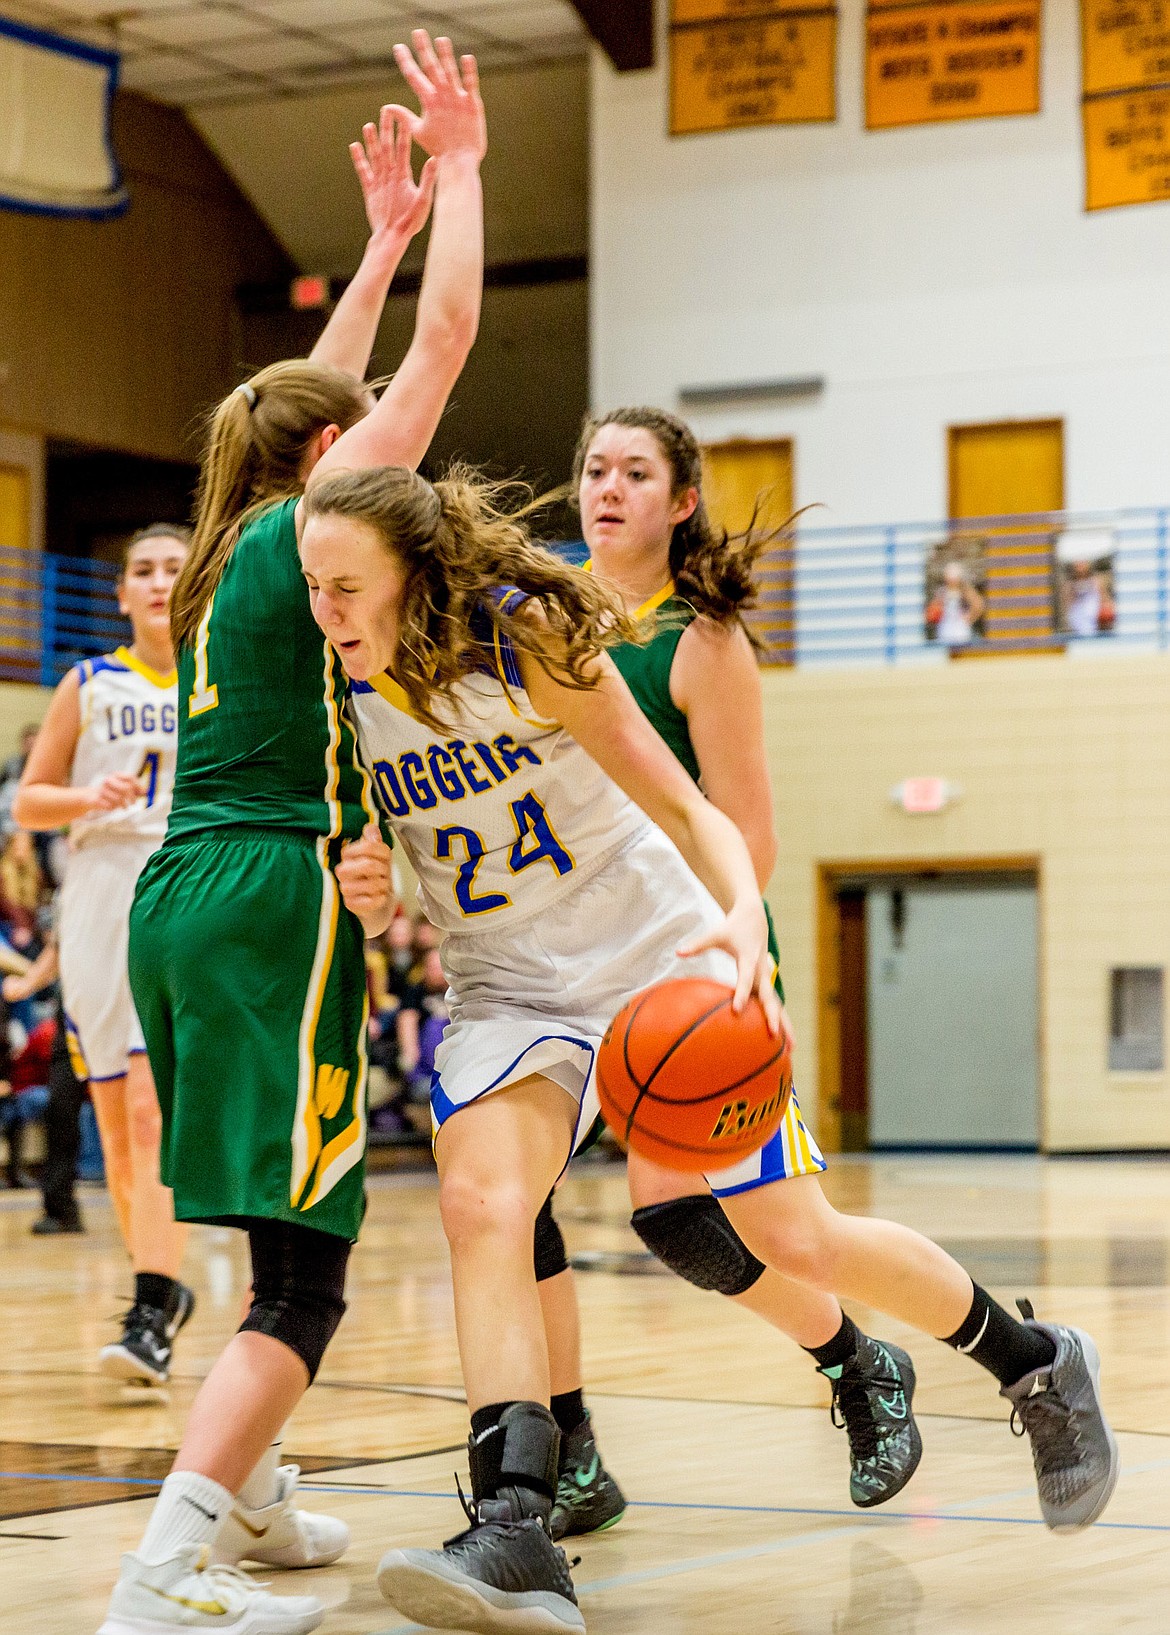 Libby's Jayden Winslow pushes past Whitefish's Kit Anderson Thursday in Libby. (John Blodgett/The Western News)